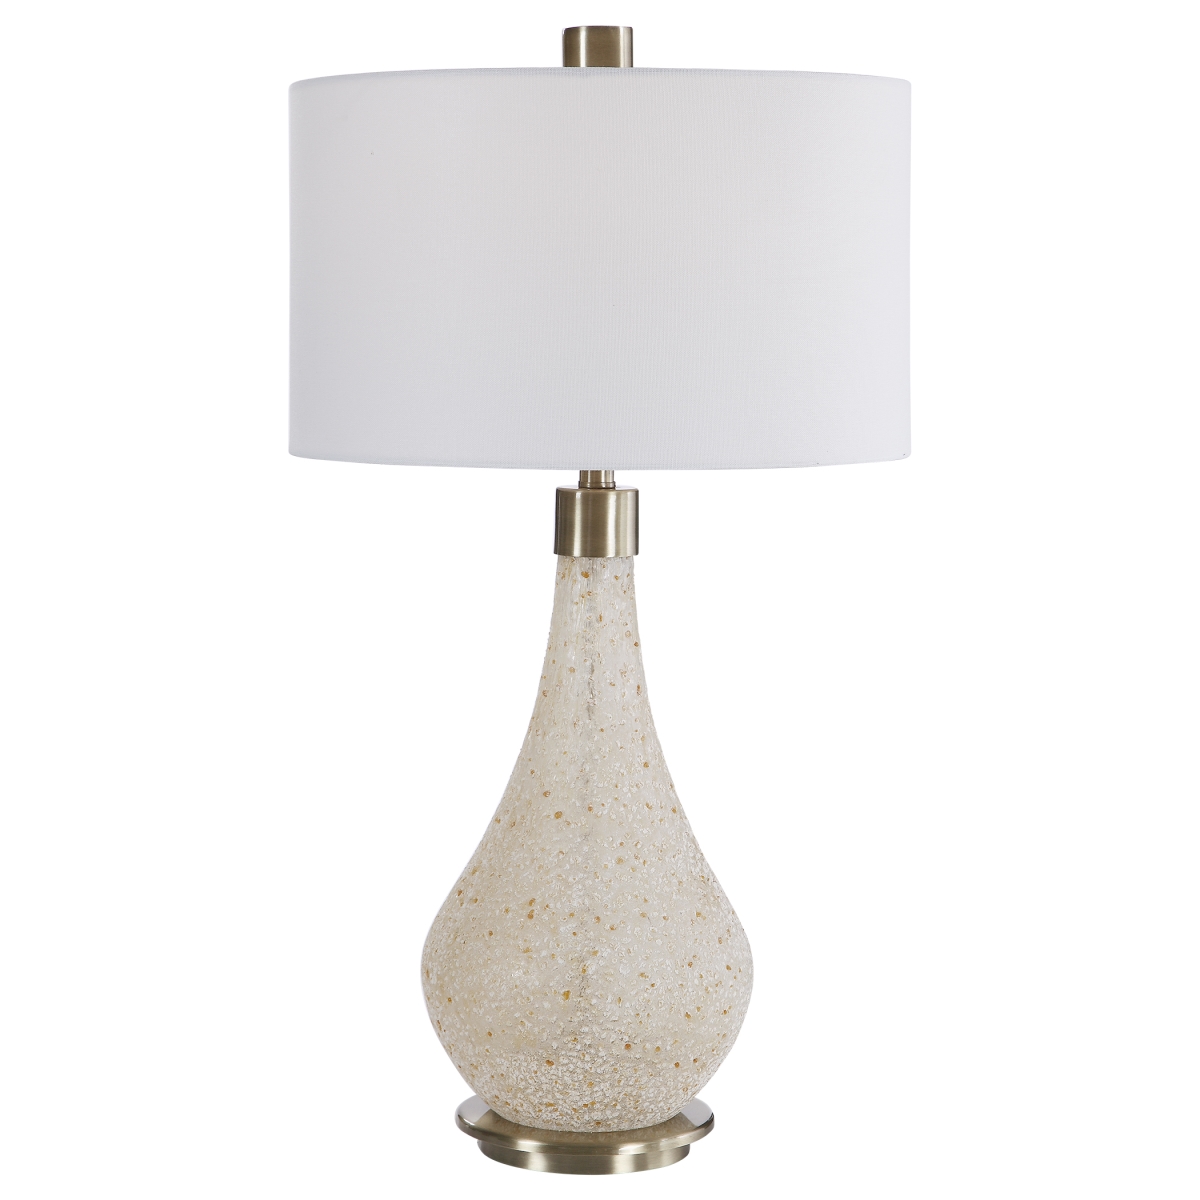 Picture of 212 Main 26377-1 Chaya Textured Cream Table Lamp